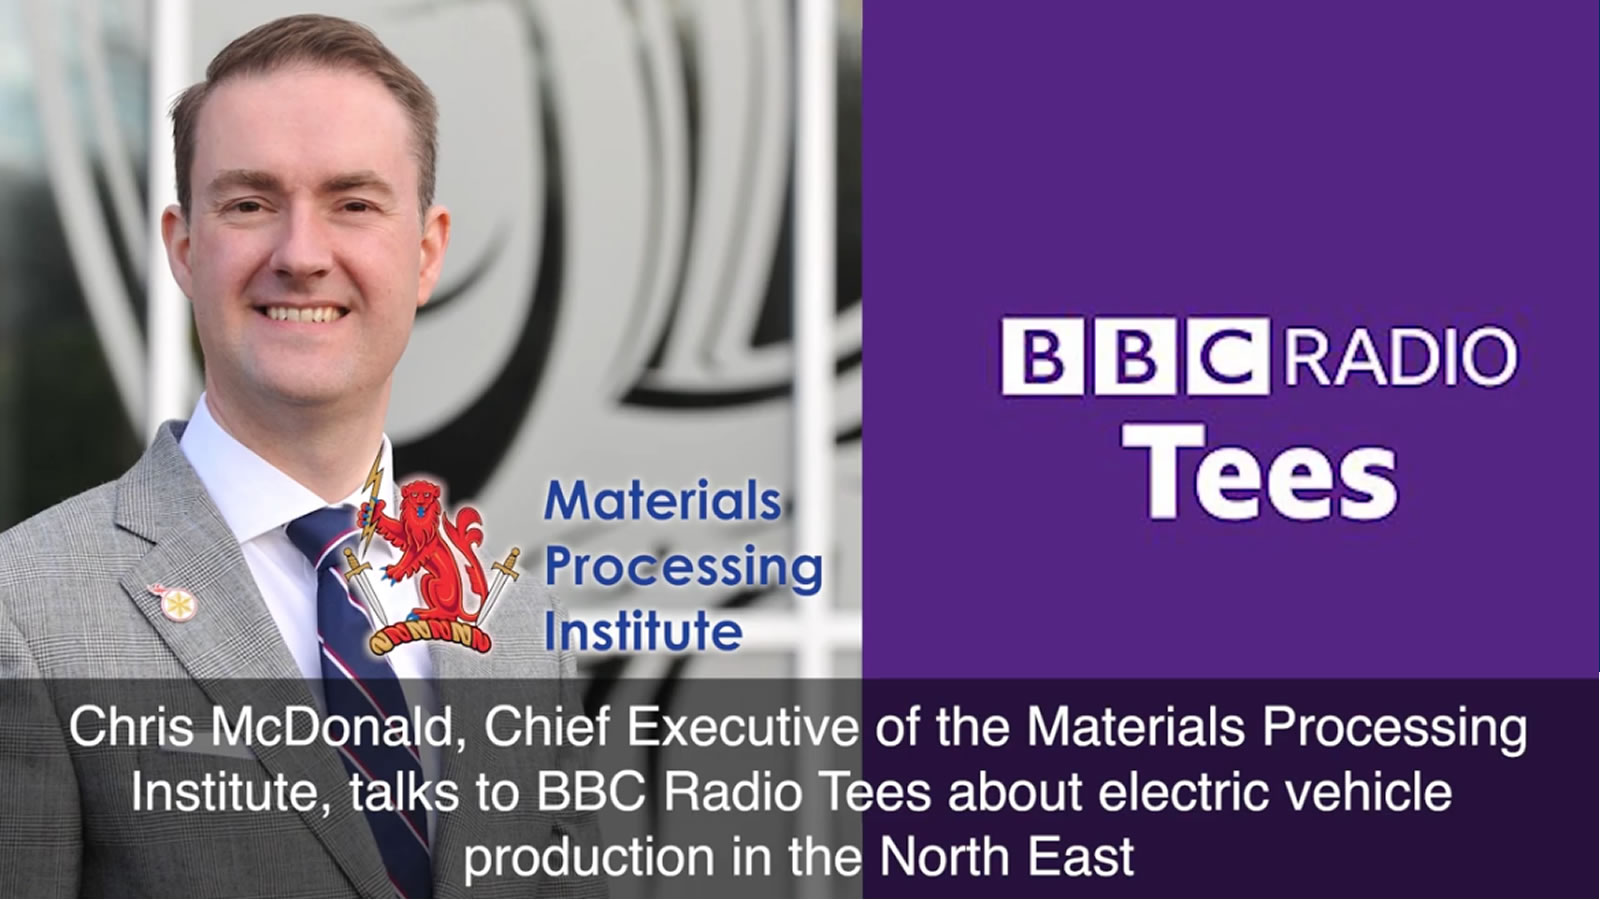 Chris McDonald talks to BBC Radio Tees about electric vehicle production in the North East - January 2021